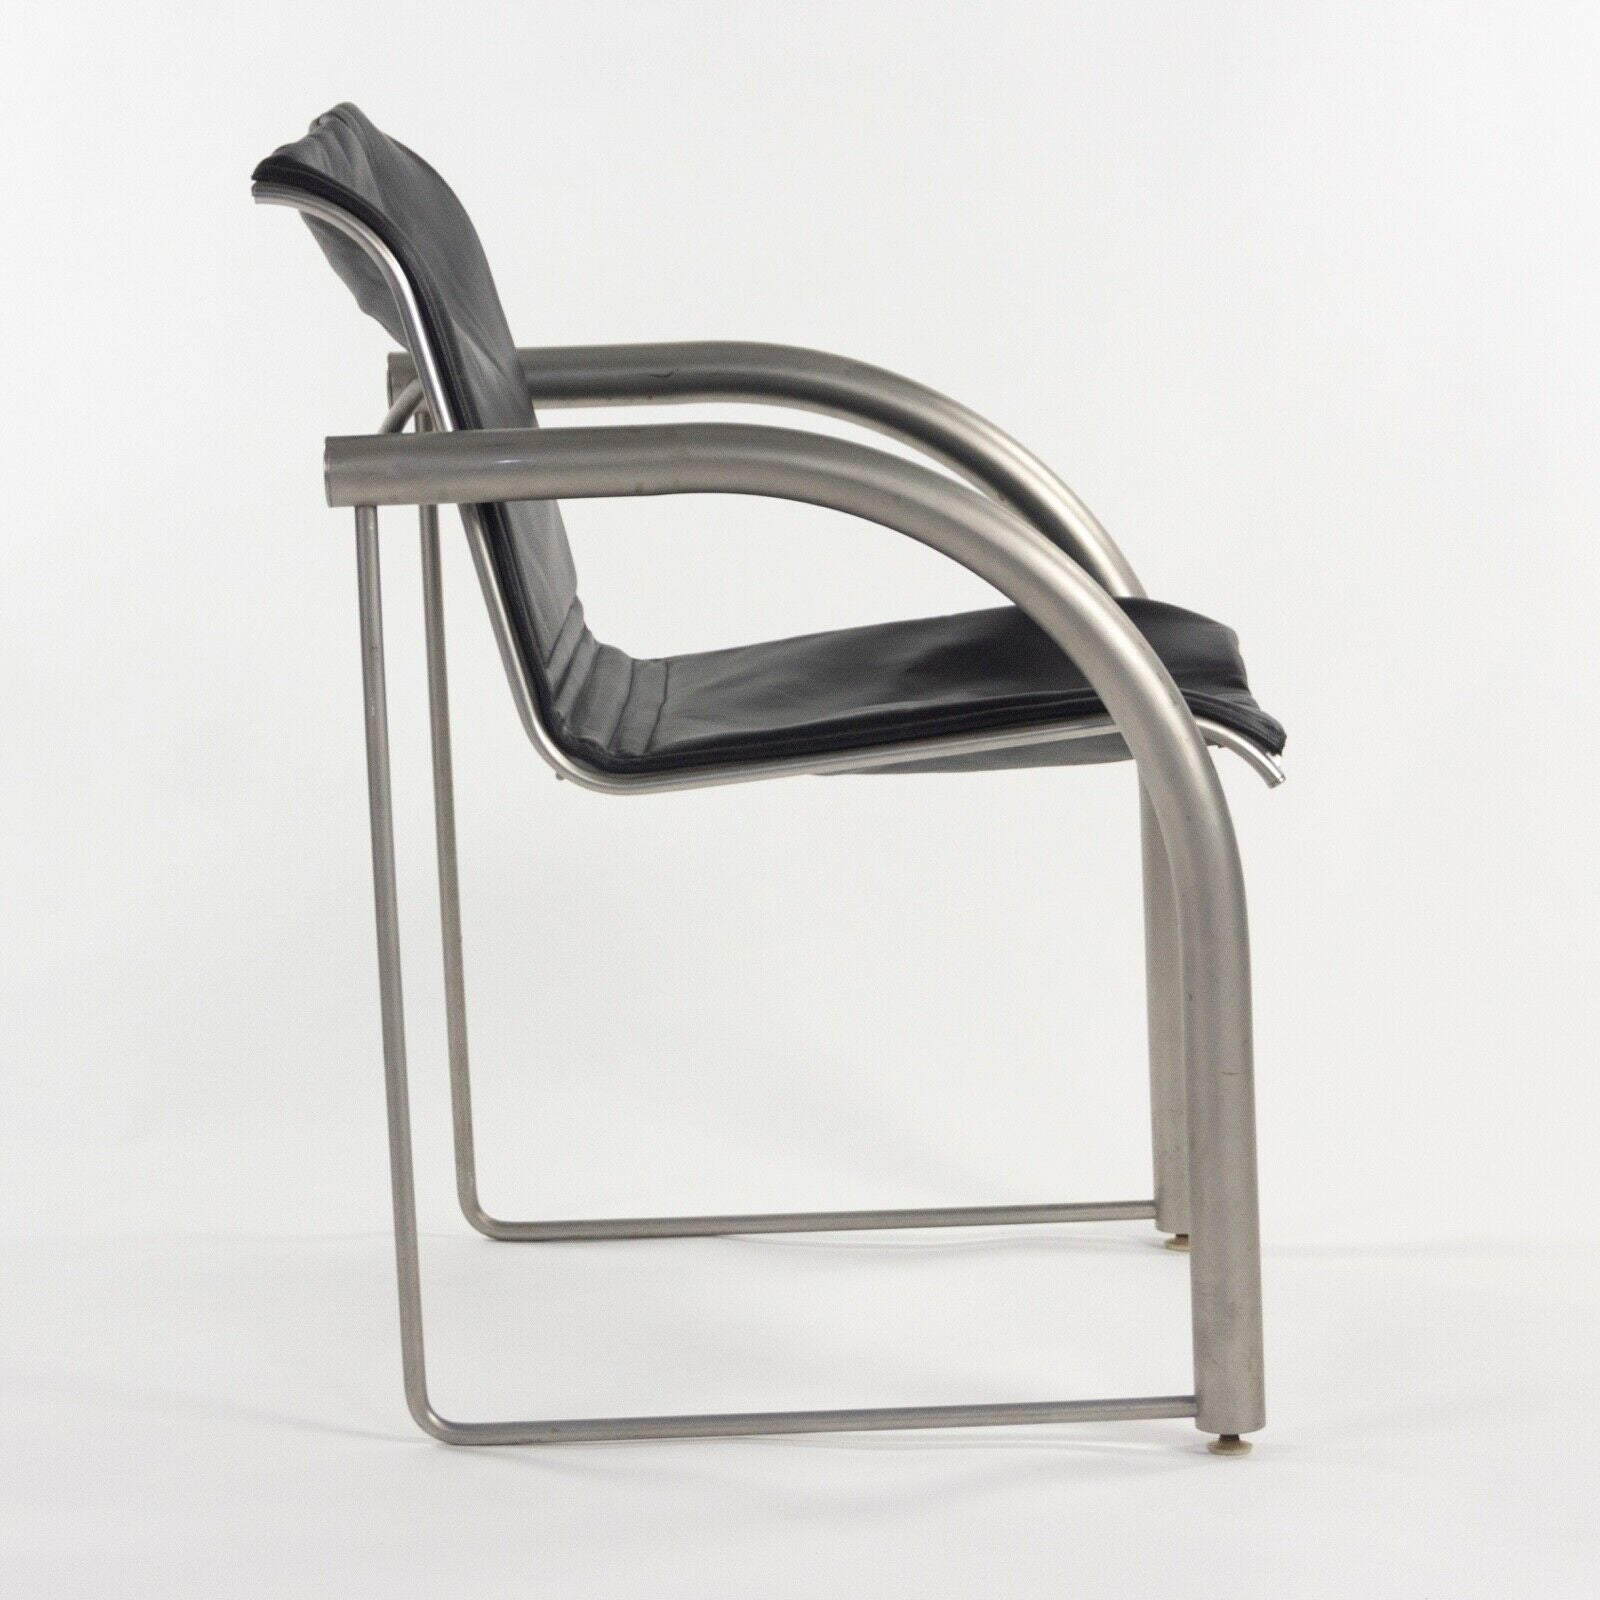 Prototype Richard Schultz 2002 Collection Stainless & Leather Dining Chair